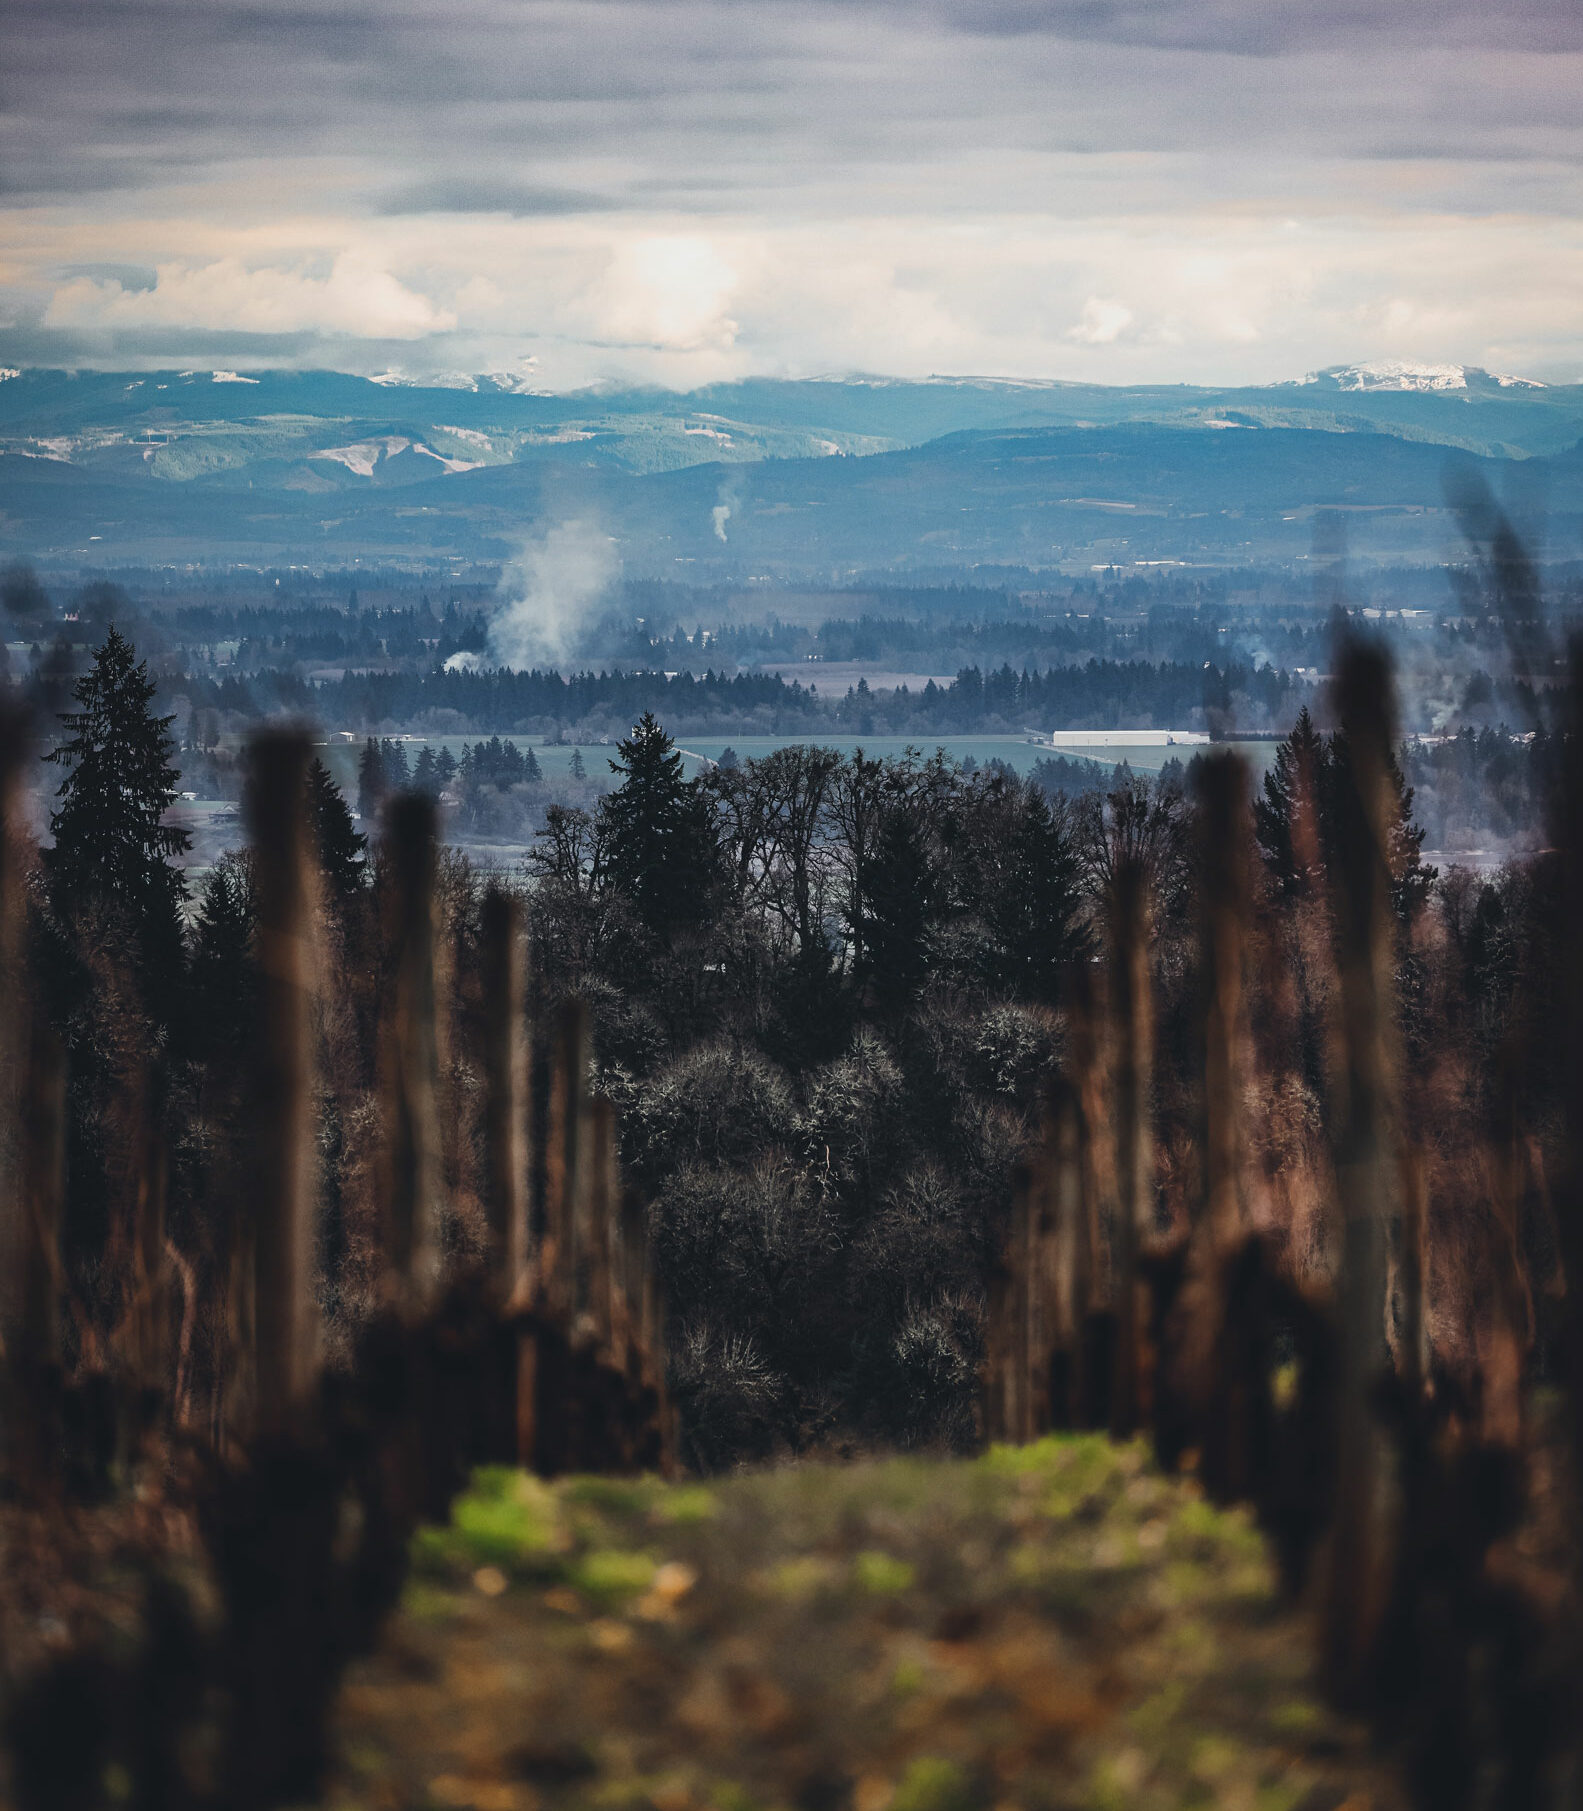 View of the Willamette Valley past the Chosen Family Wines vineyard